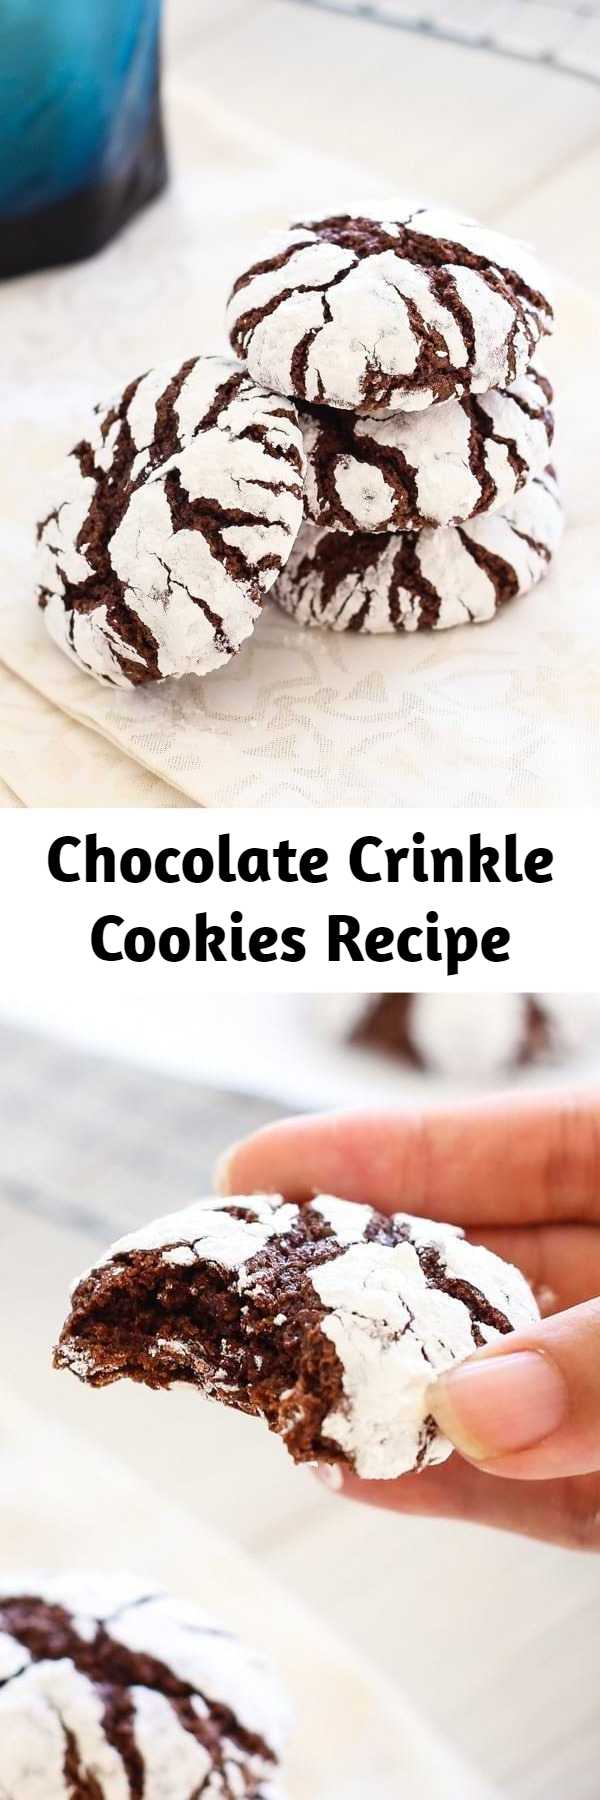 Chocolate Crinkle Cookies - sweet, easy and the BEST chocolate crinkle cookie recipe with butter, cocoa and powdered sugar. Great for Christmas holidays!